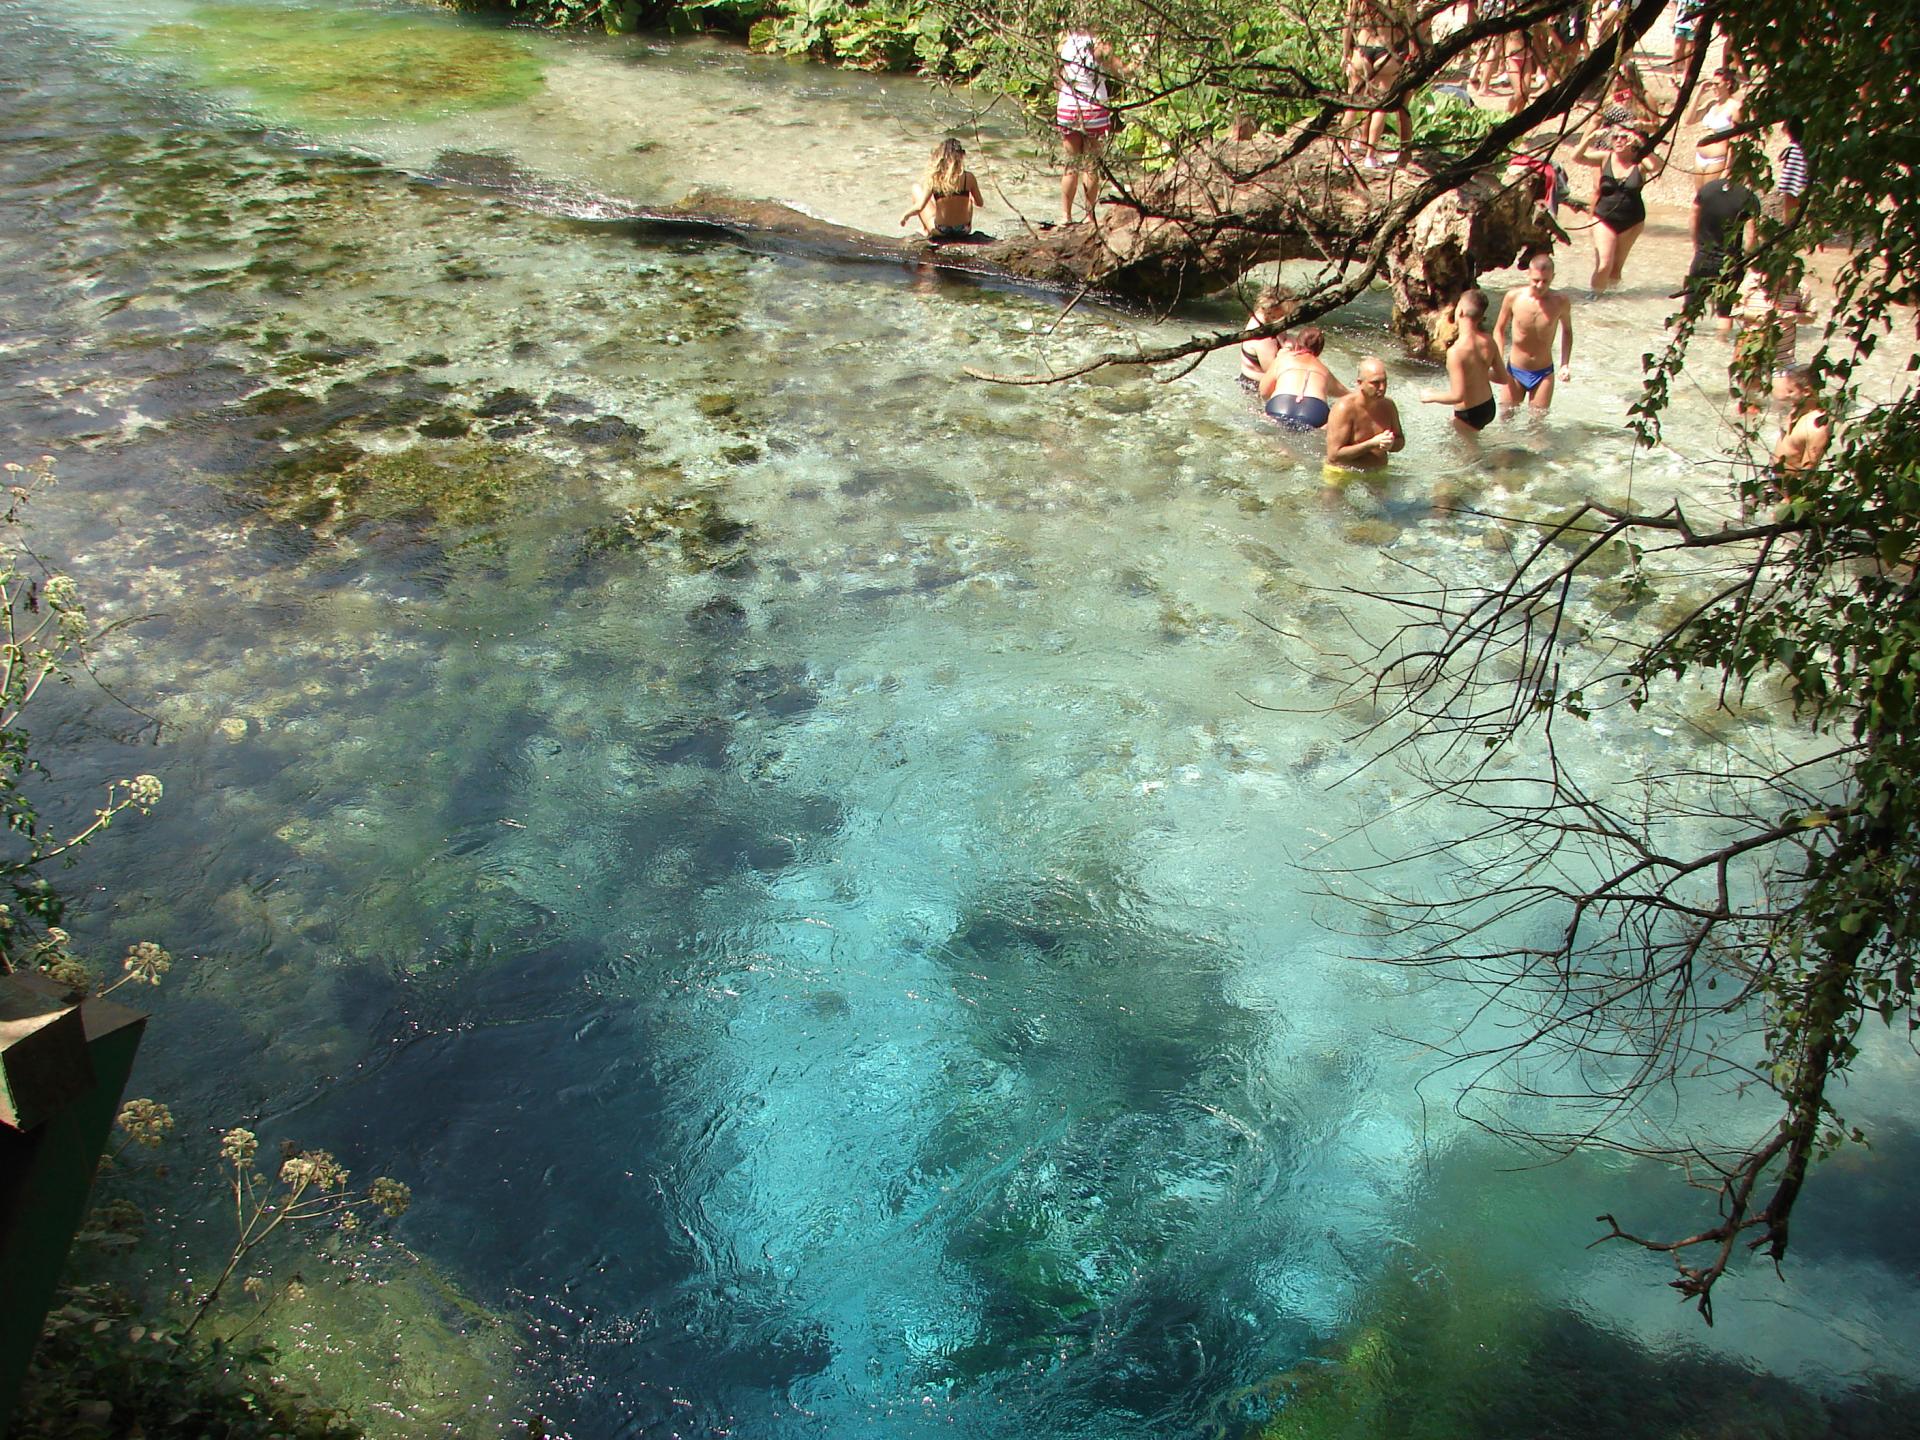 Blue Eye - a natural spring in Albania